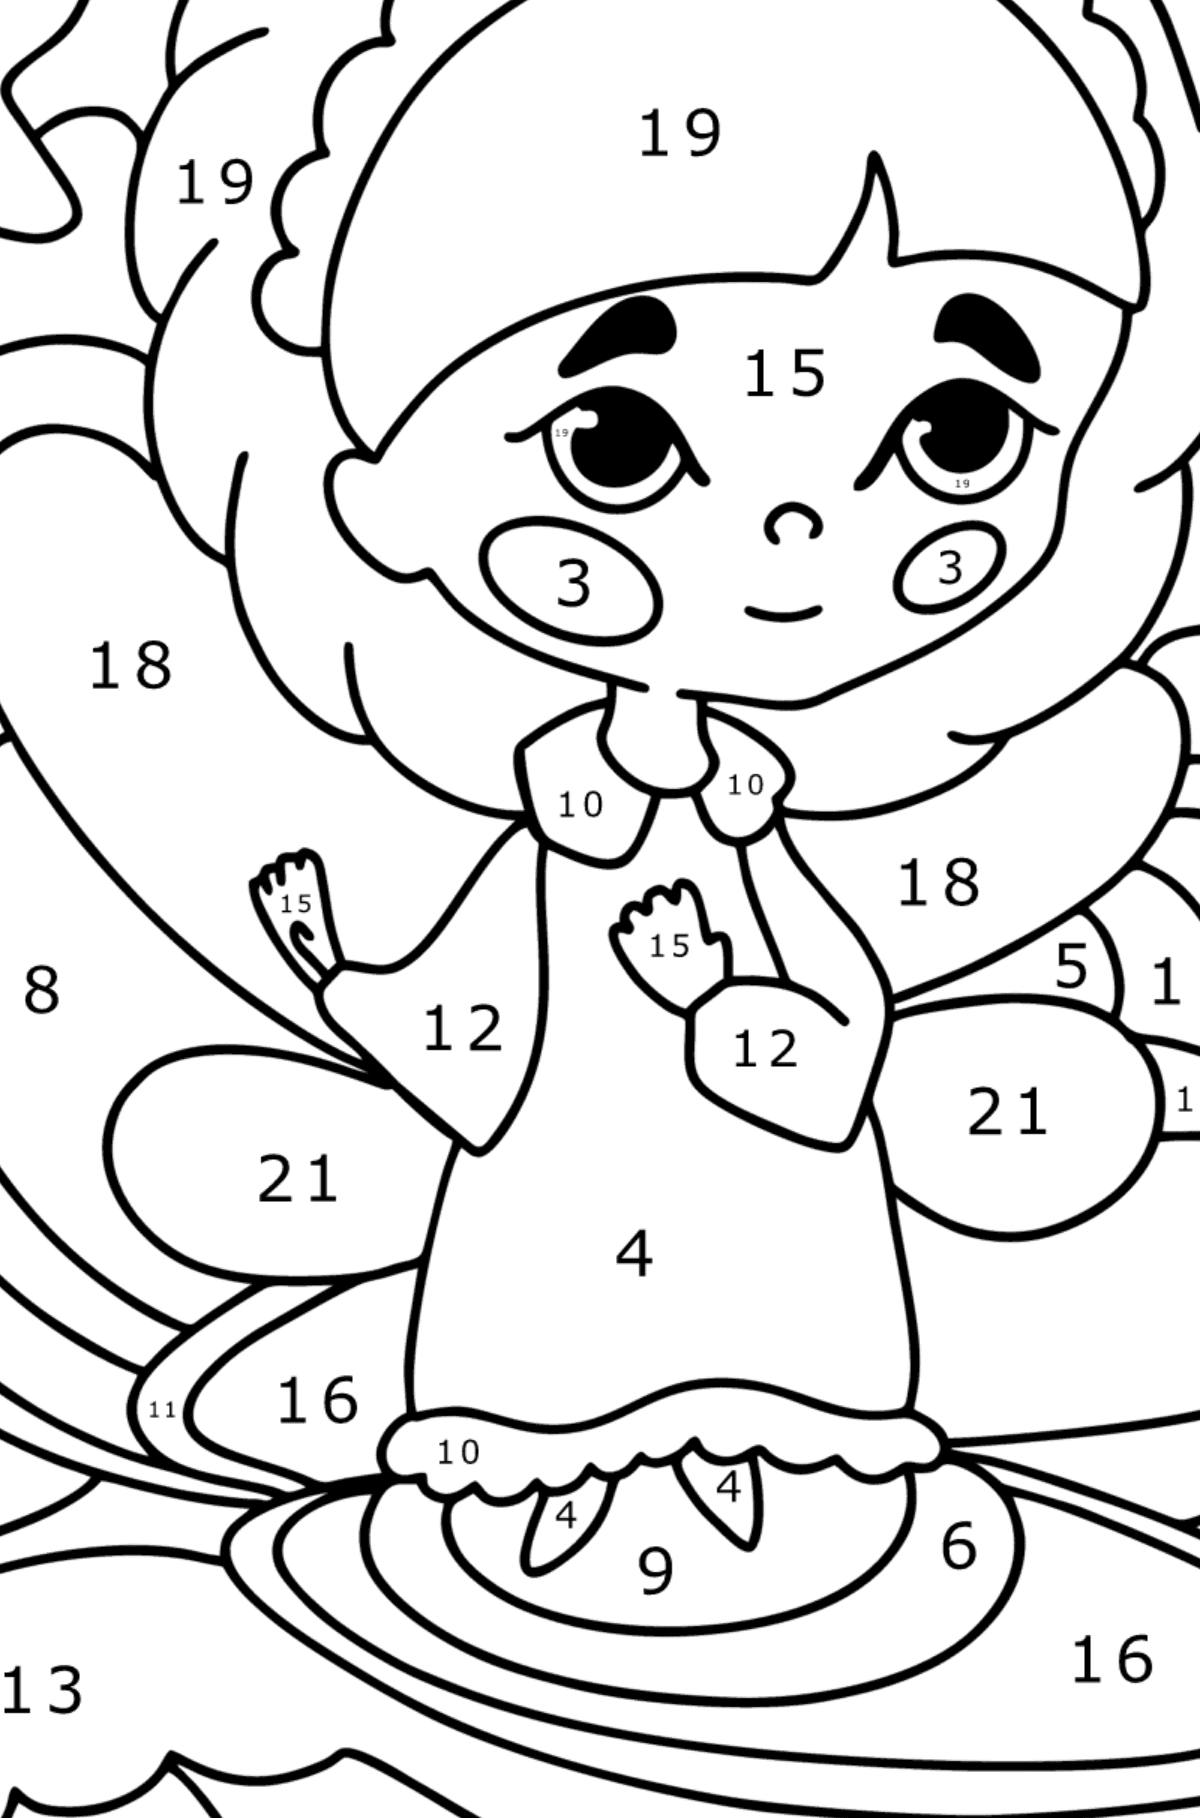 Sea Fairy coloring page - Coloring by Numbers for Kids